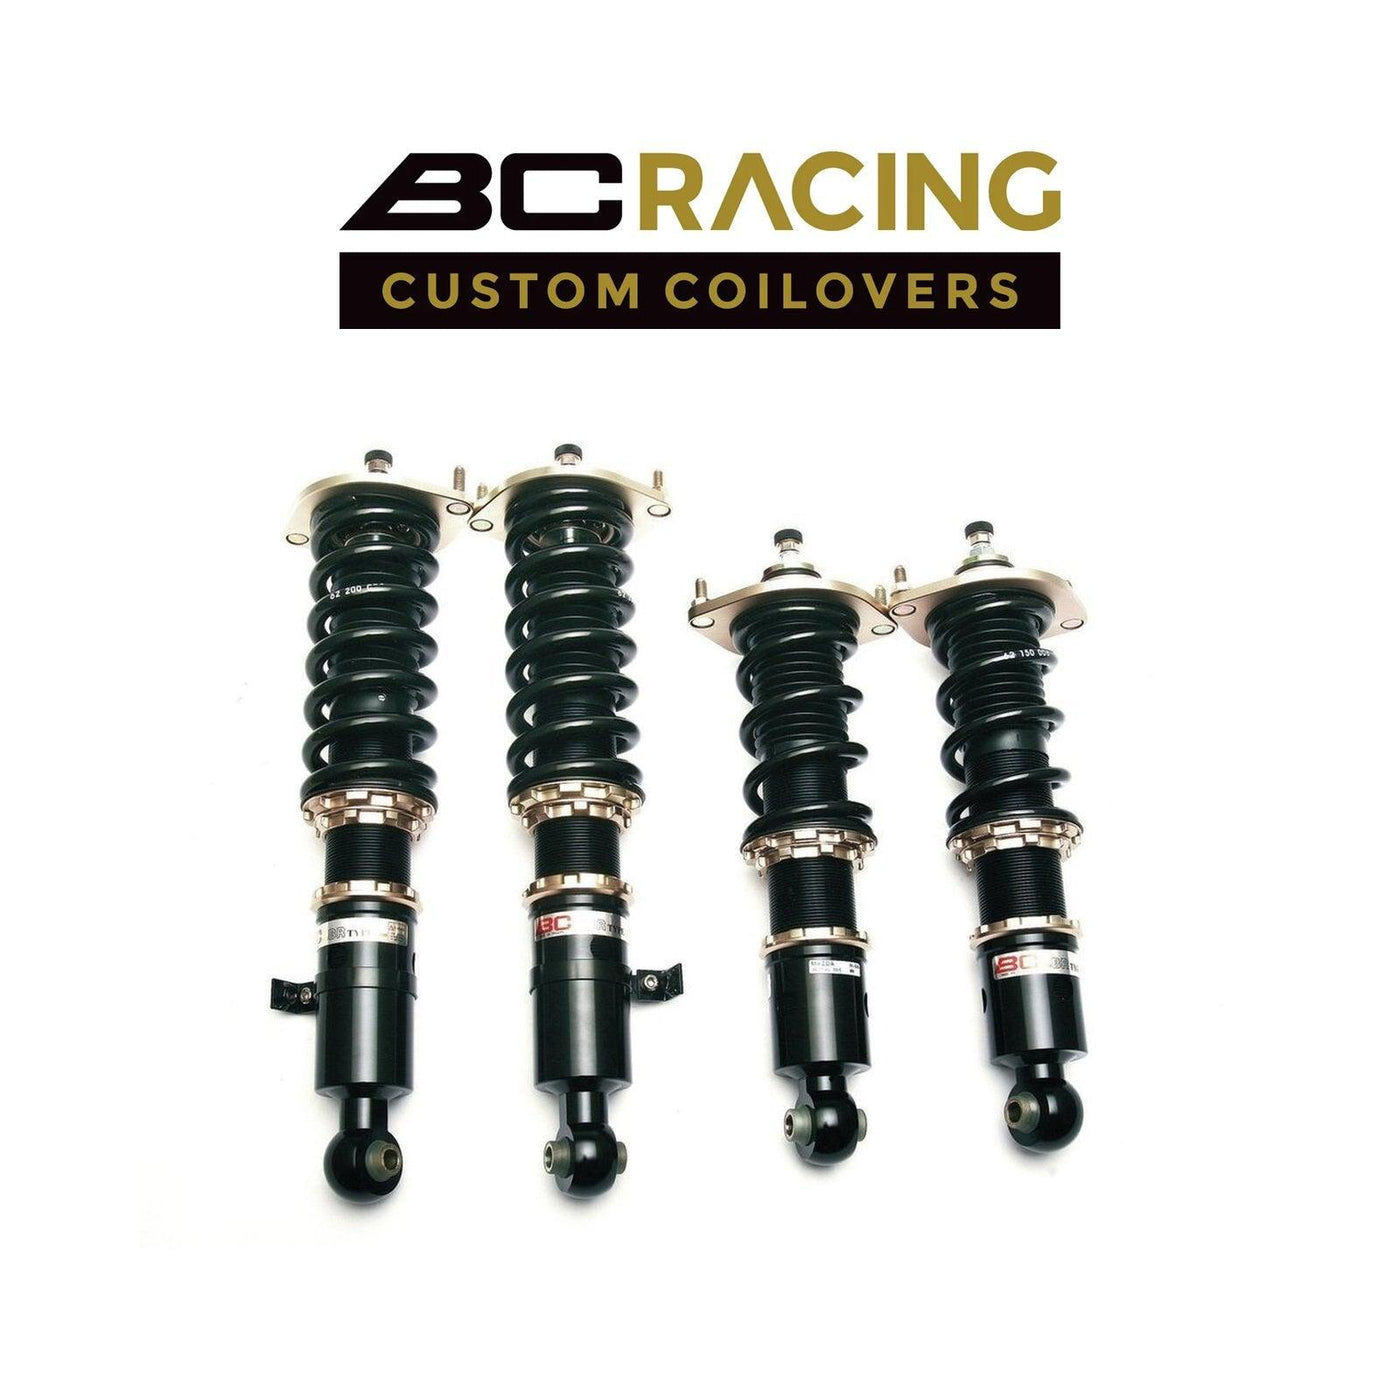 BC Racing Coilovers 2000-2004 MAZDA Premacy - Attacking the Clock Racing